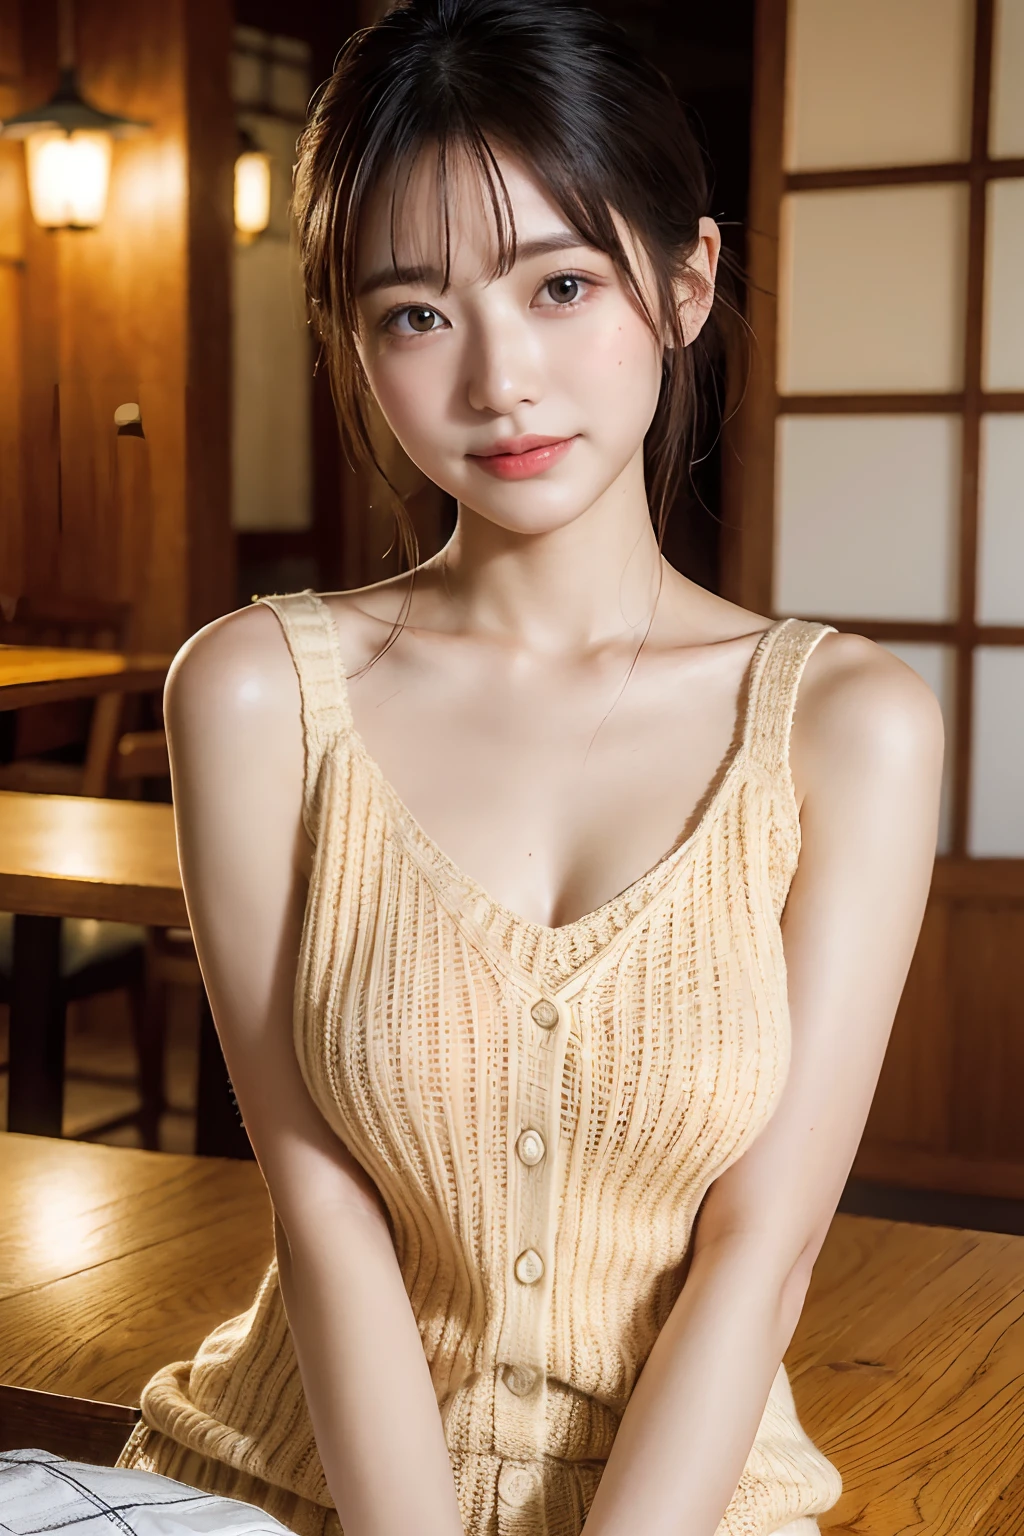 (natta:1.7), East Asian Architecture, 1womanl,  sixteen years old、Colossal tits　Beautiful shiny straight semi-long、Beautiful fingers,Beautiful long legs,Beauty Body，Cute nose，Beautiful character design，perfect  eyes，face perfect，looking at viewert，（Innocent_Big_Eyes：1.0），（light_Smile：0.3），offcial art，ighly detailed ，（tmasterpiece:1.0),(best_quality:1.0), 超A high resolution,4K,ultra - detailed, photography of, 8K, nffsw, hight resolution, the background is blurred, (Beautiful_Face:1.5),(8K,Raw photo, 、Relax at a ryokan in Japan、(The background is a café restaurant at night:1.3),(White tank top&White Beige Shoulder Length Knit Cardigan、Plaid Flared Micro Mini Skirt:1.3),(Colossal tits) Backgrounds with depth　Three-dimensional feeling　((White Beige Knitted Camisole、Thin string:1.4)) Beautiful large breast　(Sitting leaning forward with your chest proudly on the table:1.3)